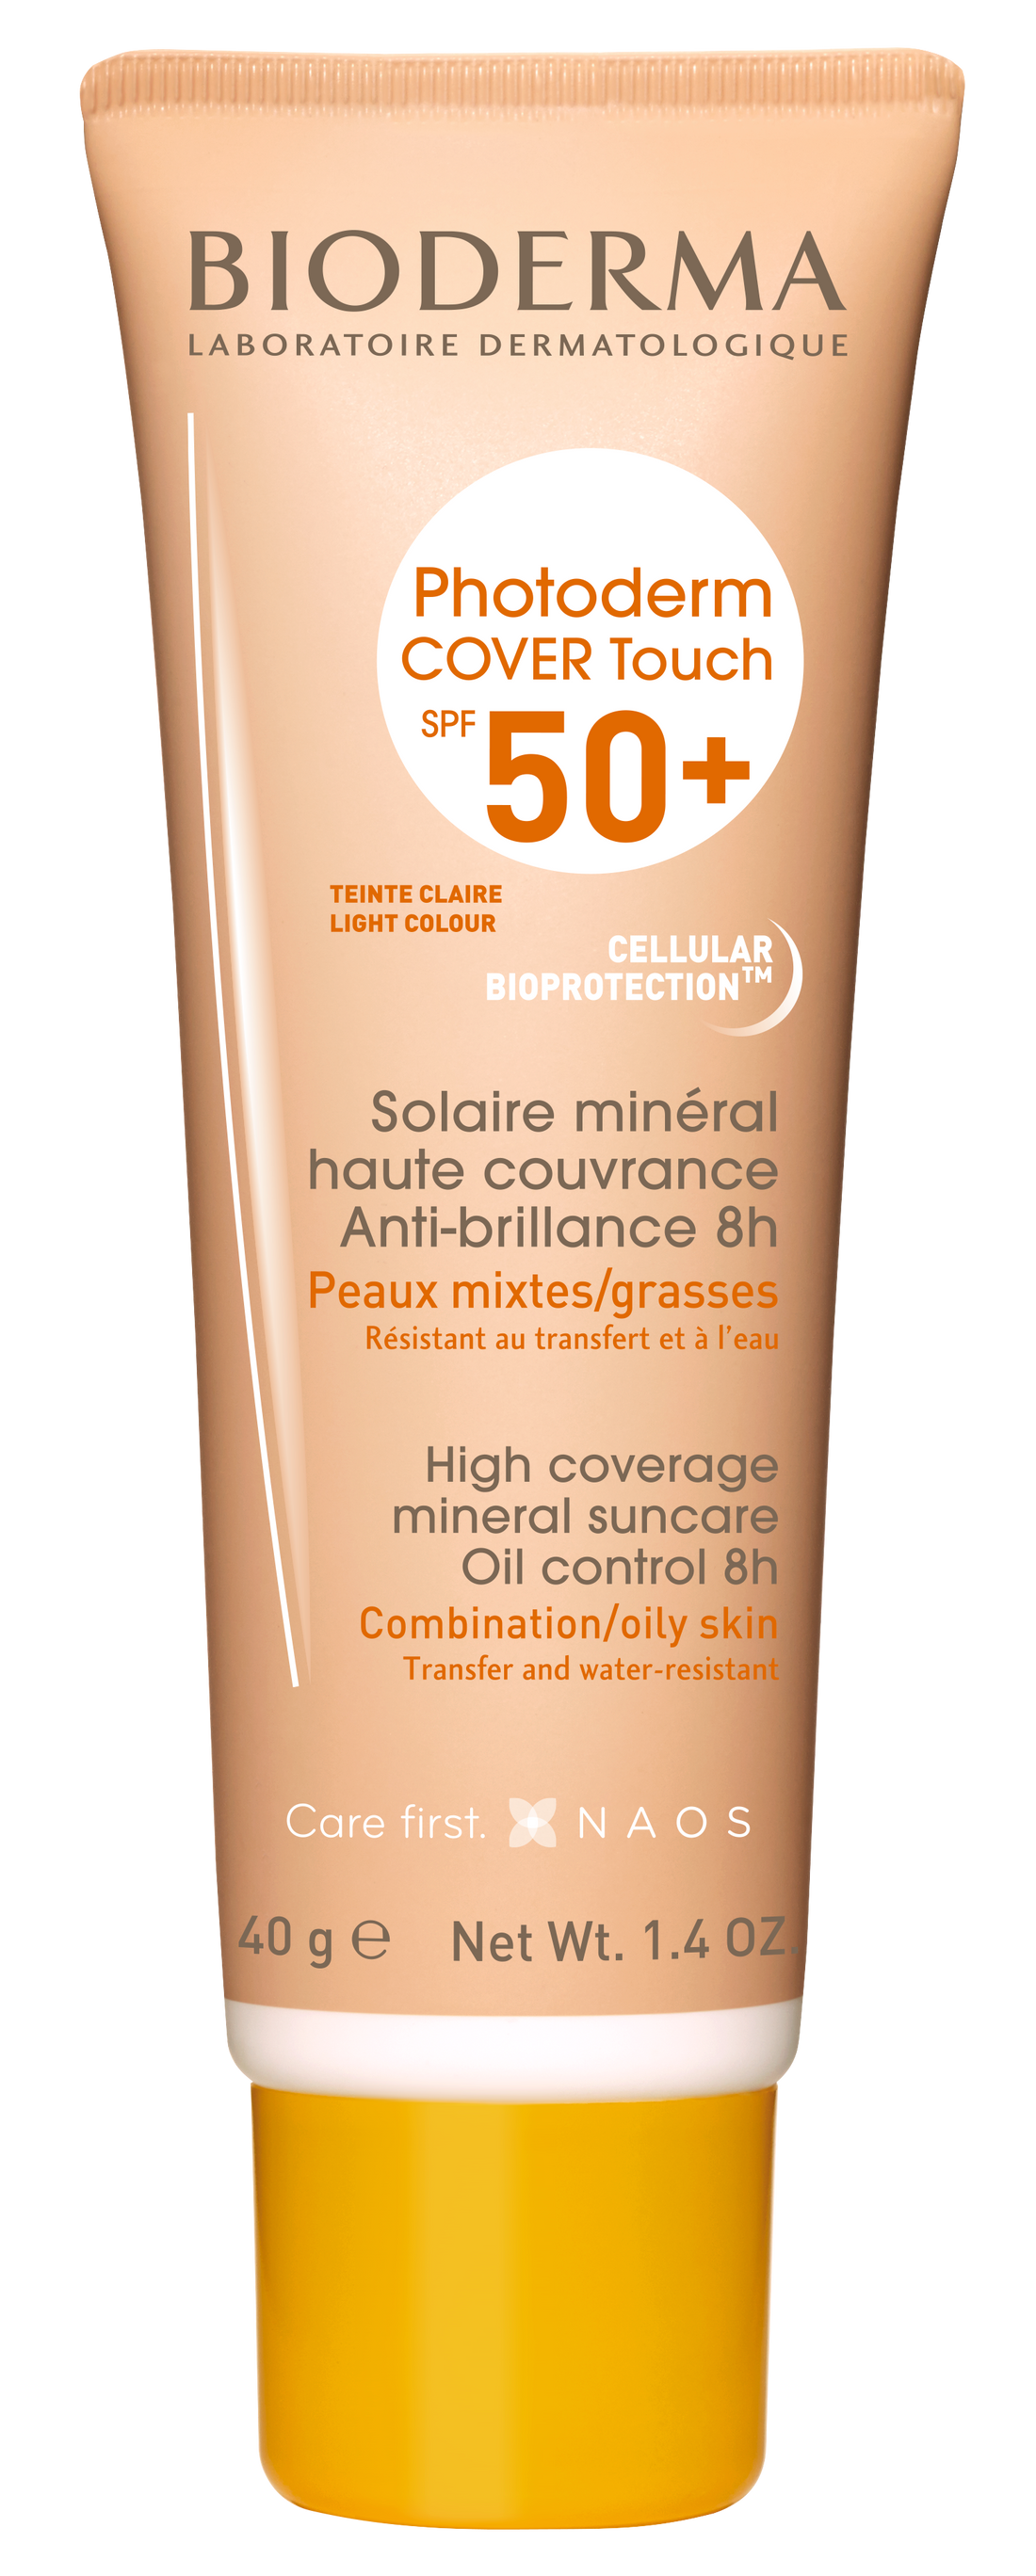 Bioderma Photoderm COVER Touch SPF 50+ High coverage mineral sunscreen, Light tint 40g